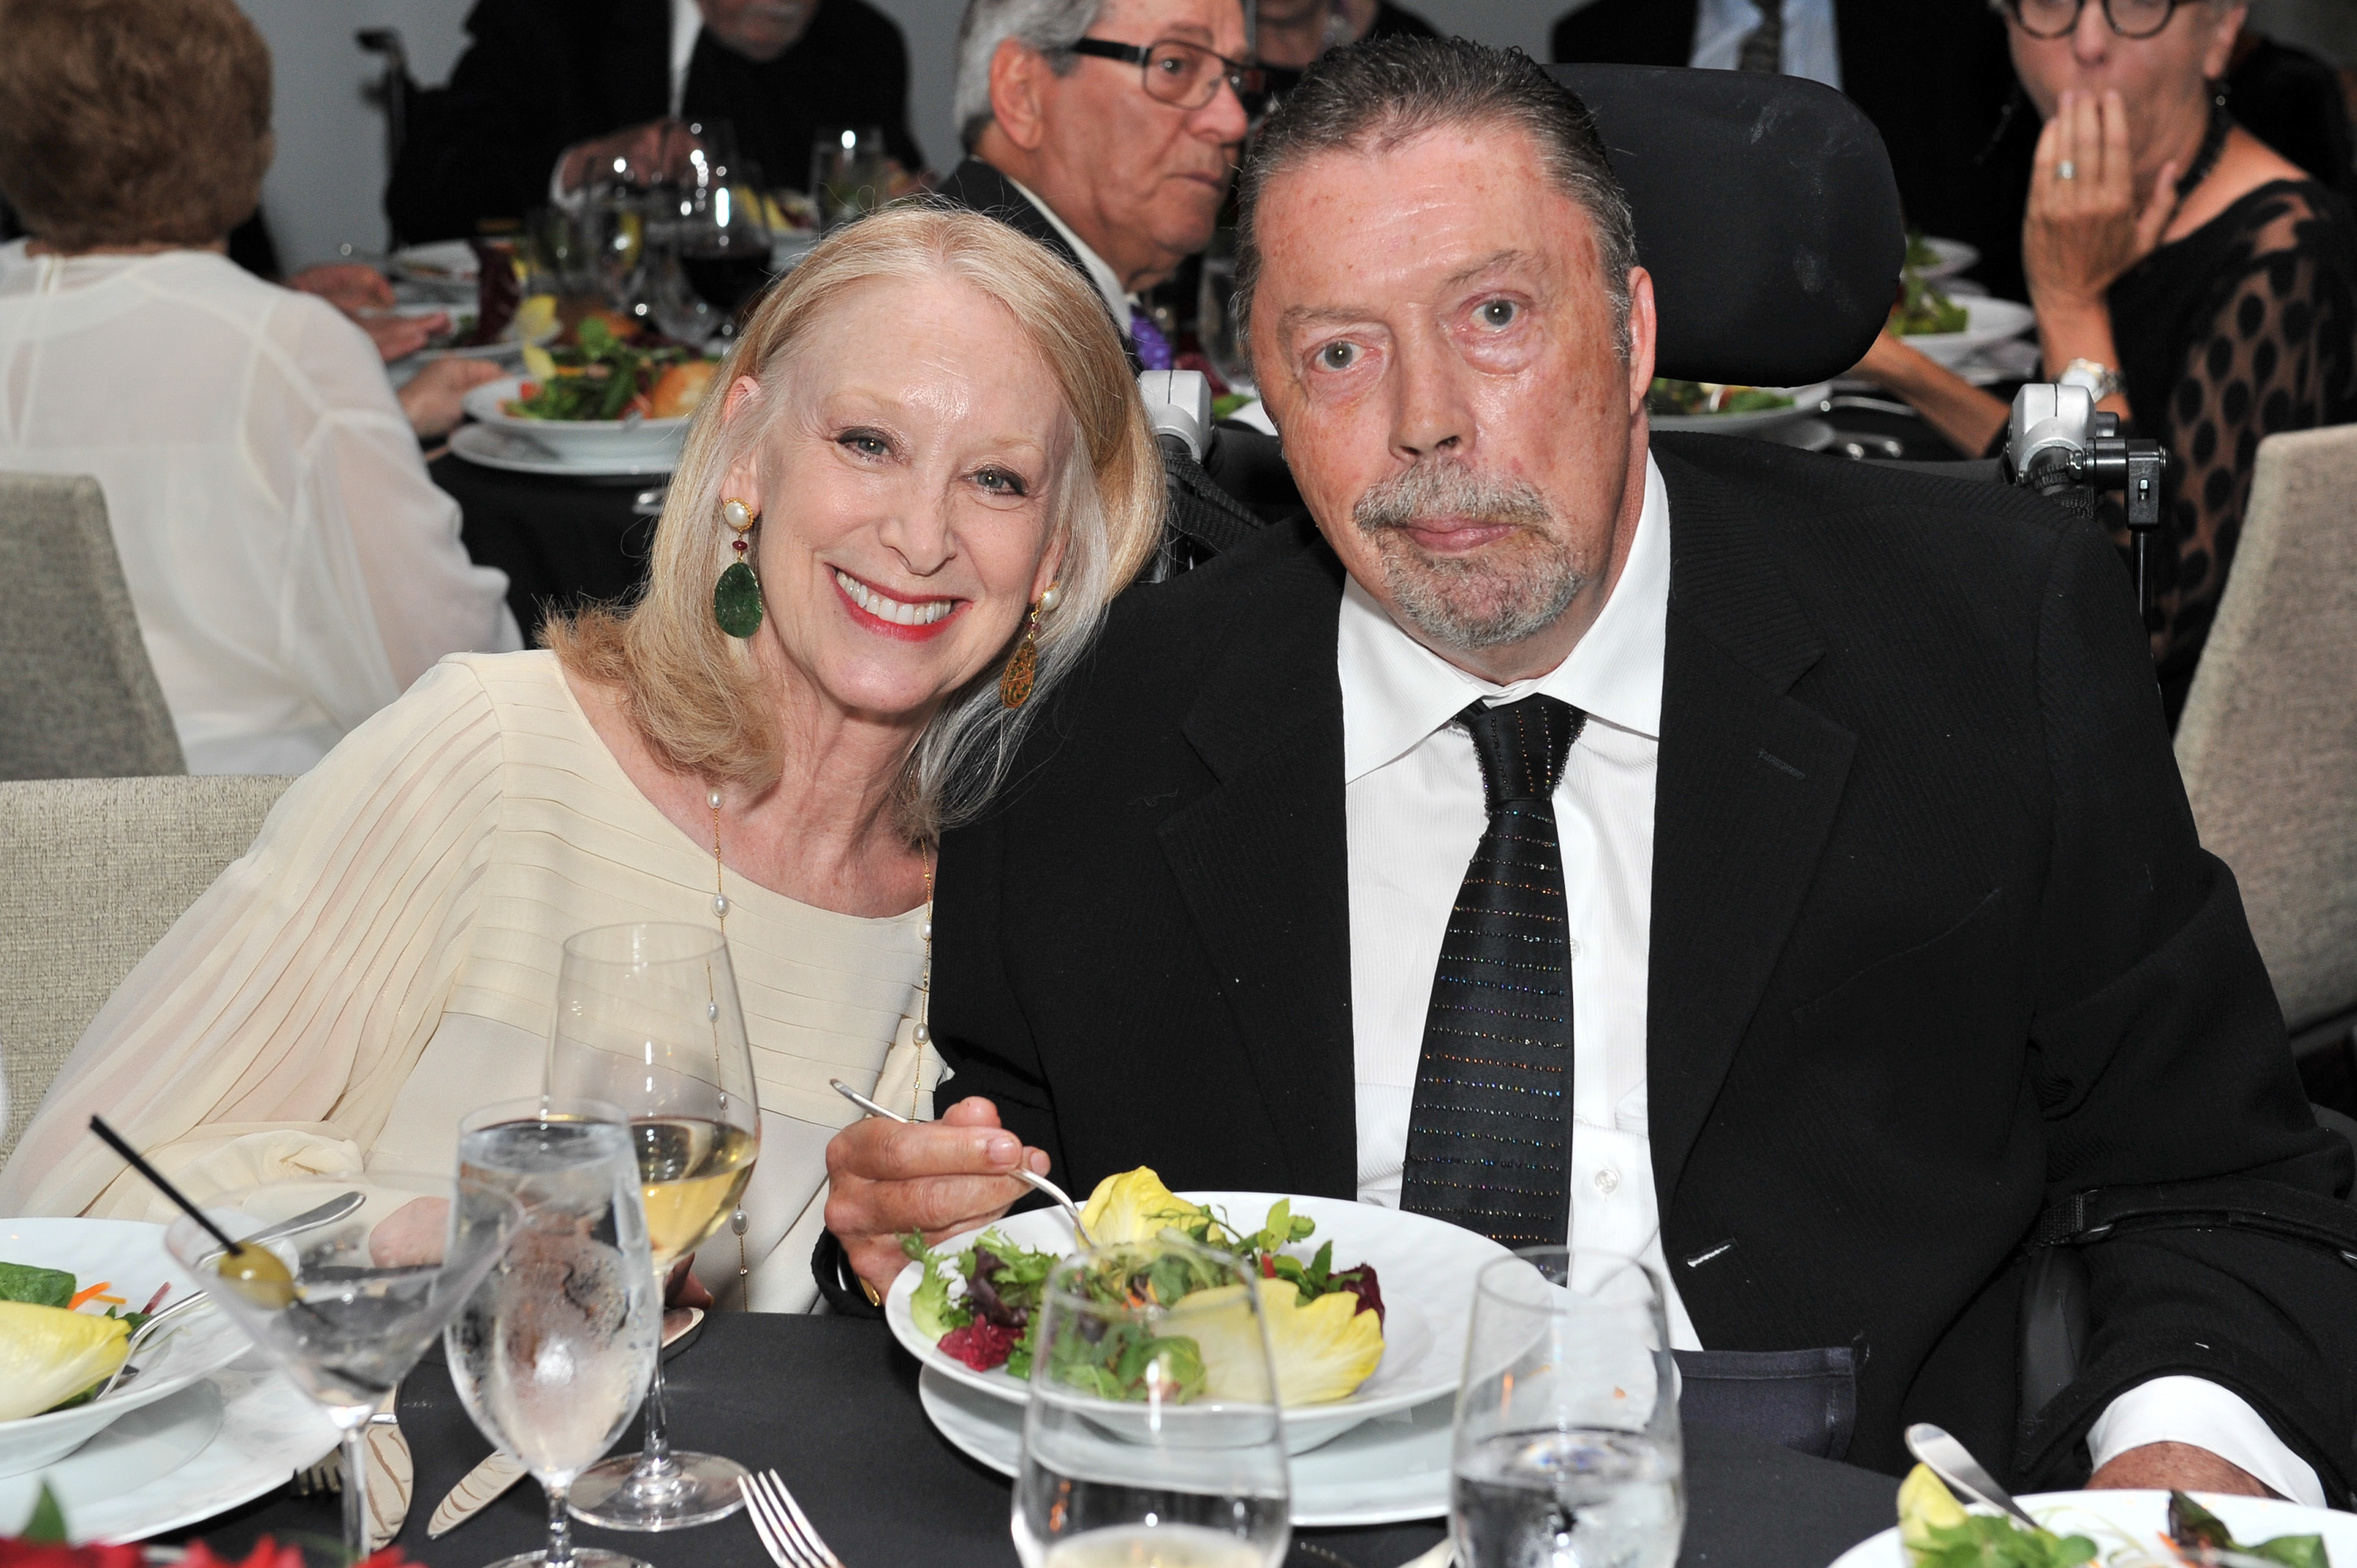 Tim Curry and Marcia Hurwitz in Los Angeles 2015 | Source: Getty Images